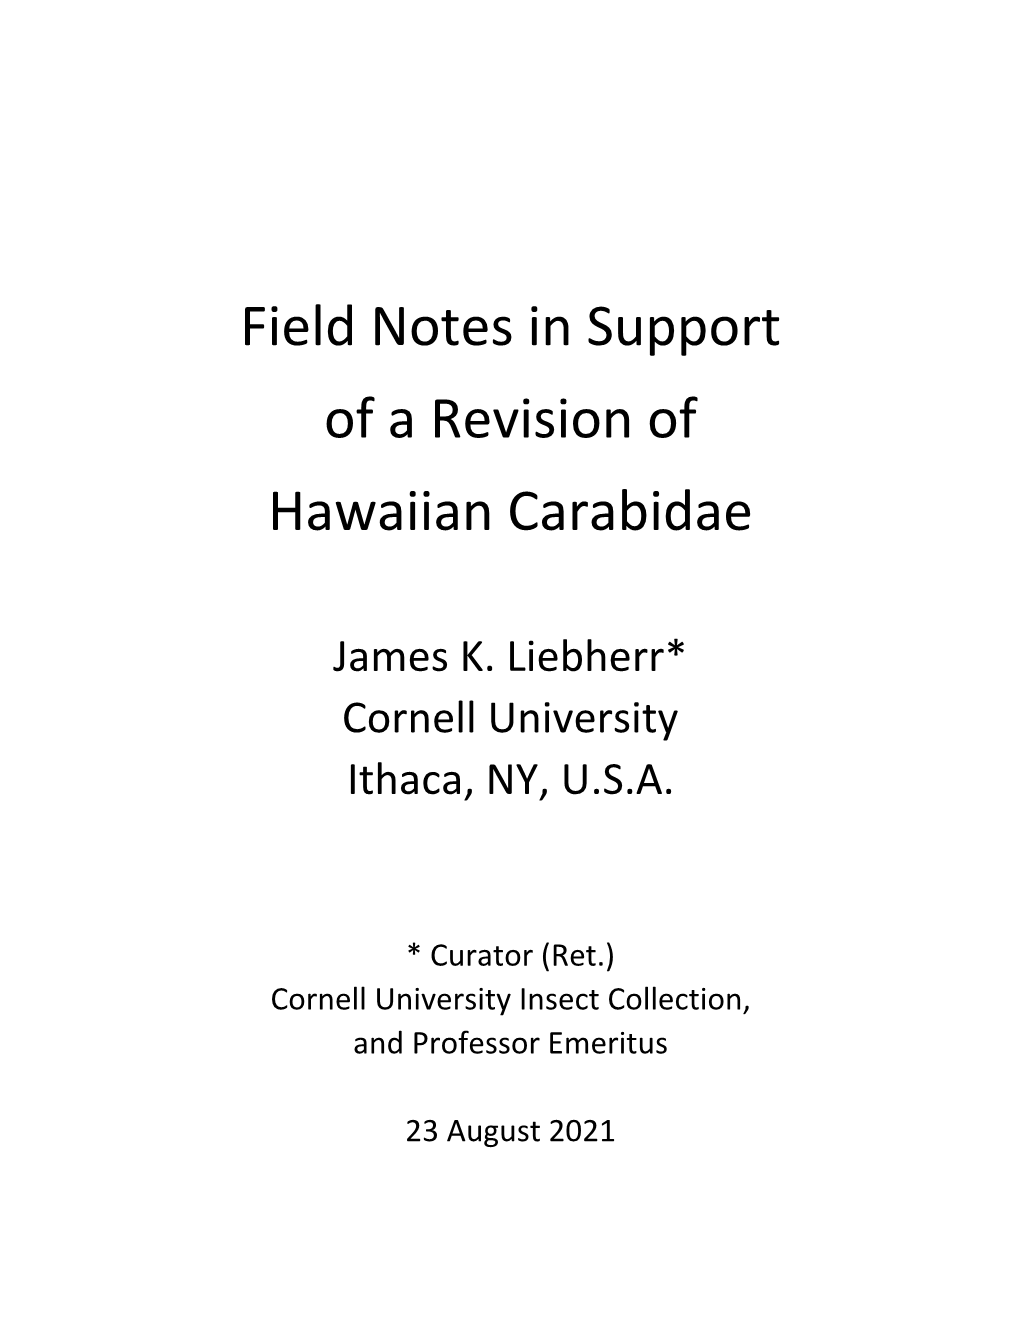 Field Notes in Support of a Revision of Hawaiian Carabidae